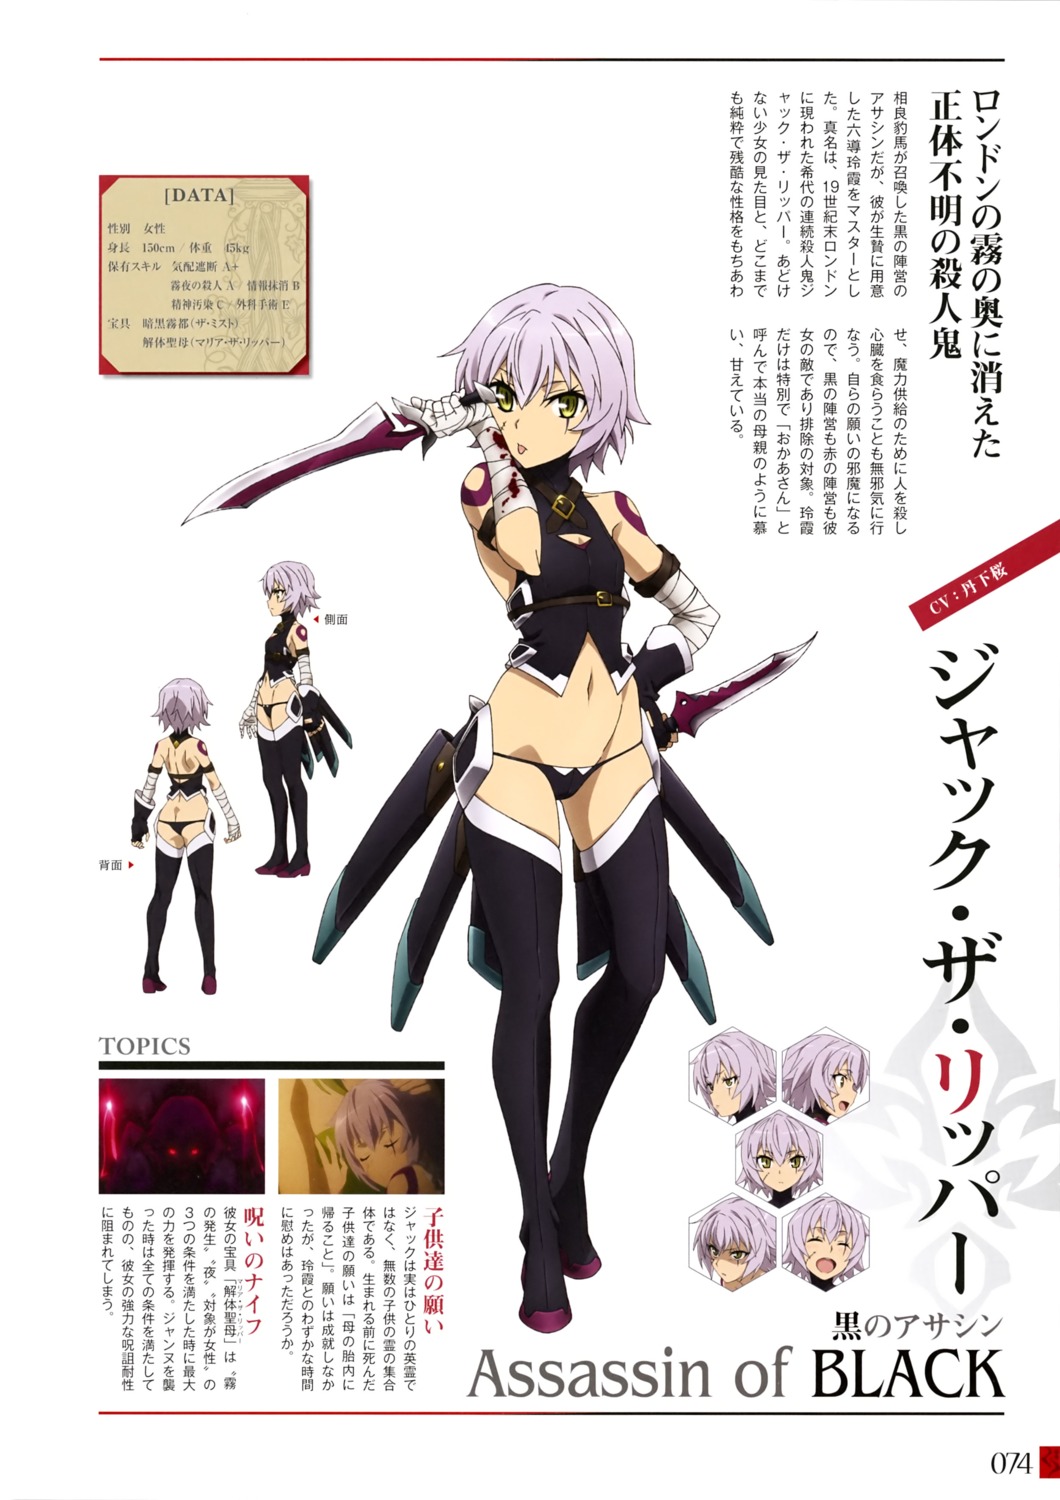 Fate Apocrypha Fate Stay Night Ass Character Design Expression Profile Page Thighhighs Weapon 5545 Yande Re